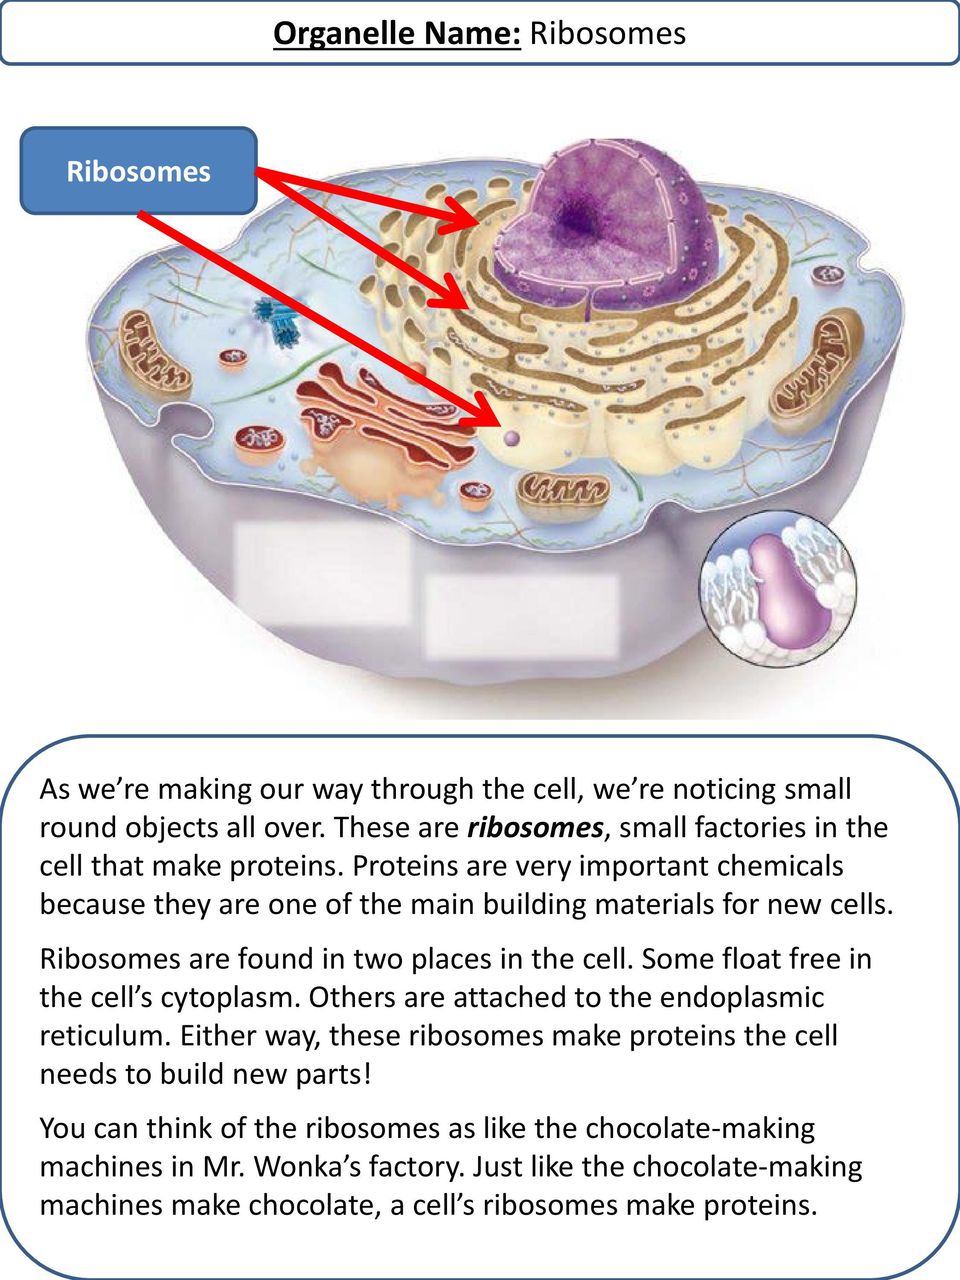 Ribosomes are found in two places in the cell. Some float free in the cell s cytoplasm. Others are attached to the endoplasmic reticulum.